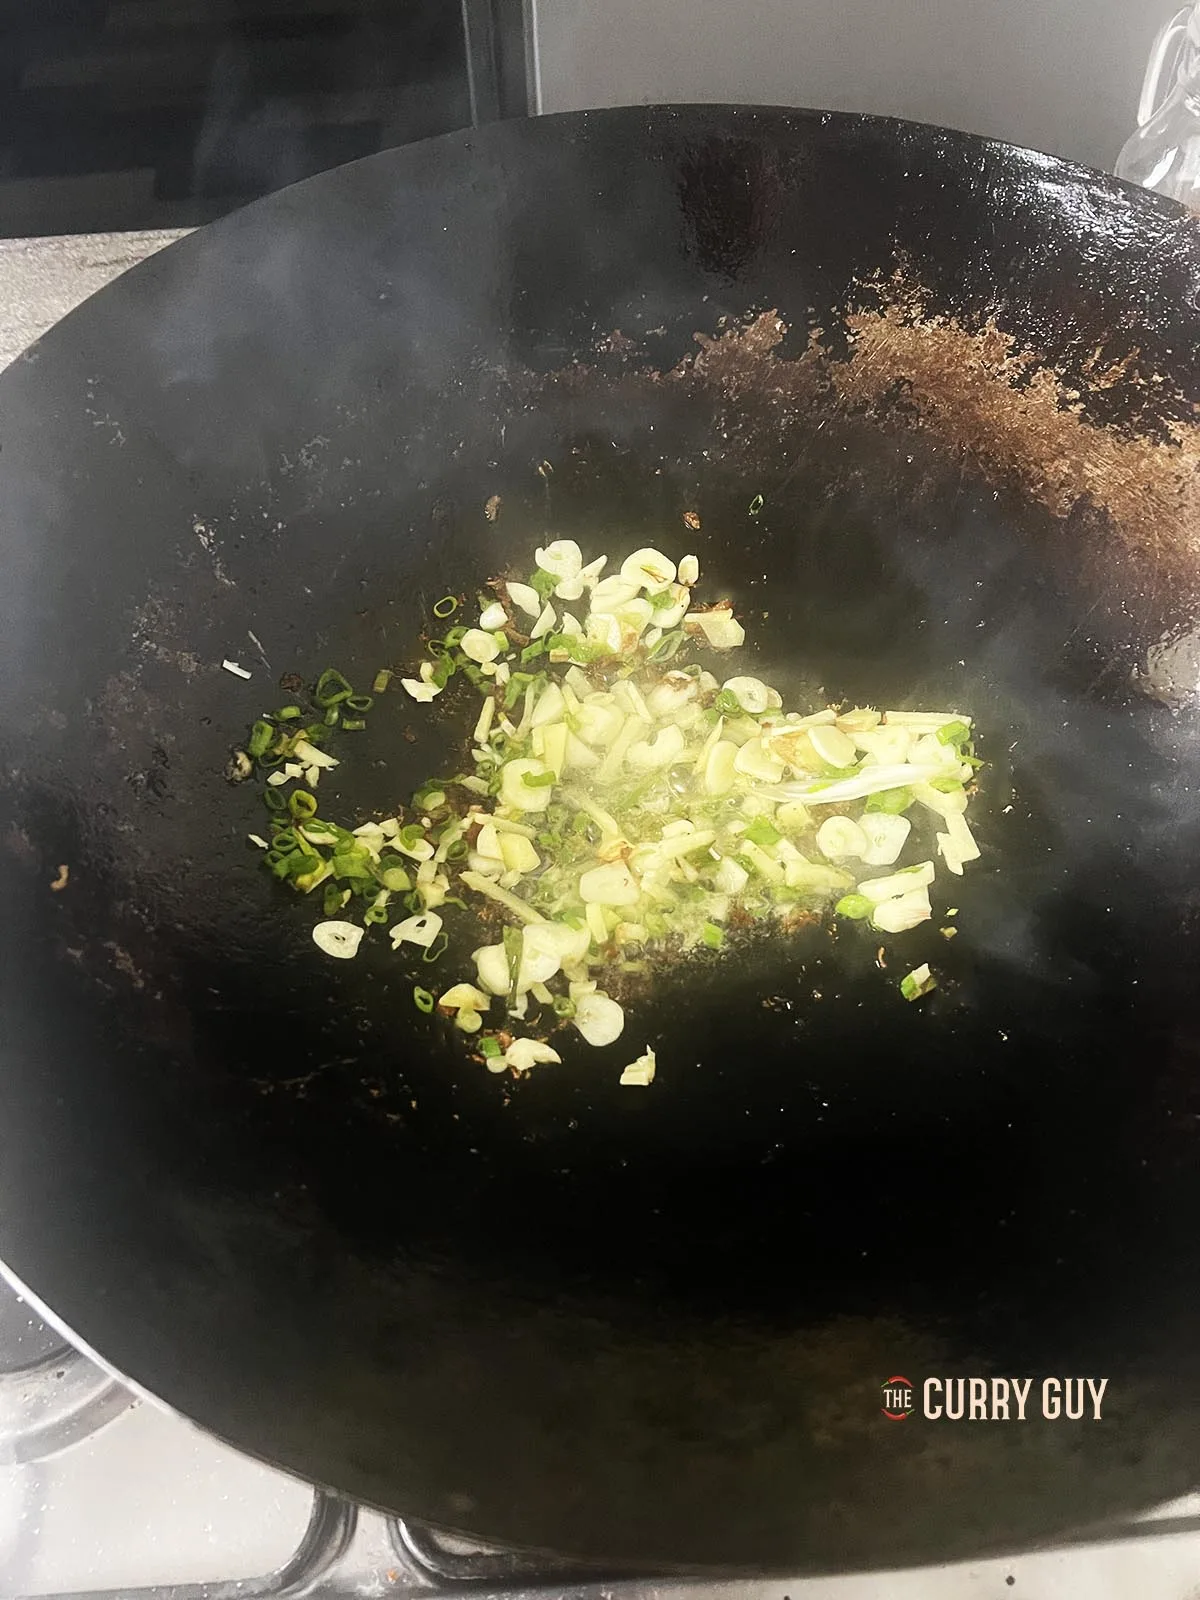 Frying the garlic, ginger and spring onions (scallions) in a wok.